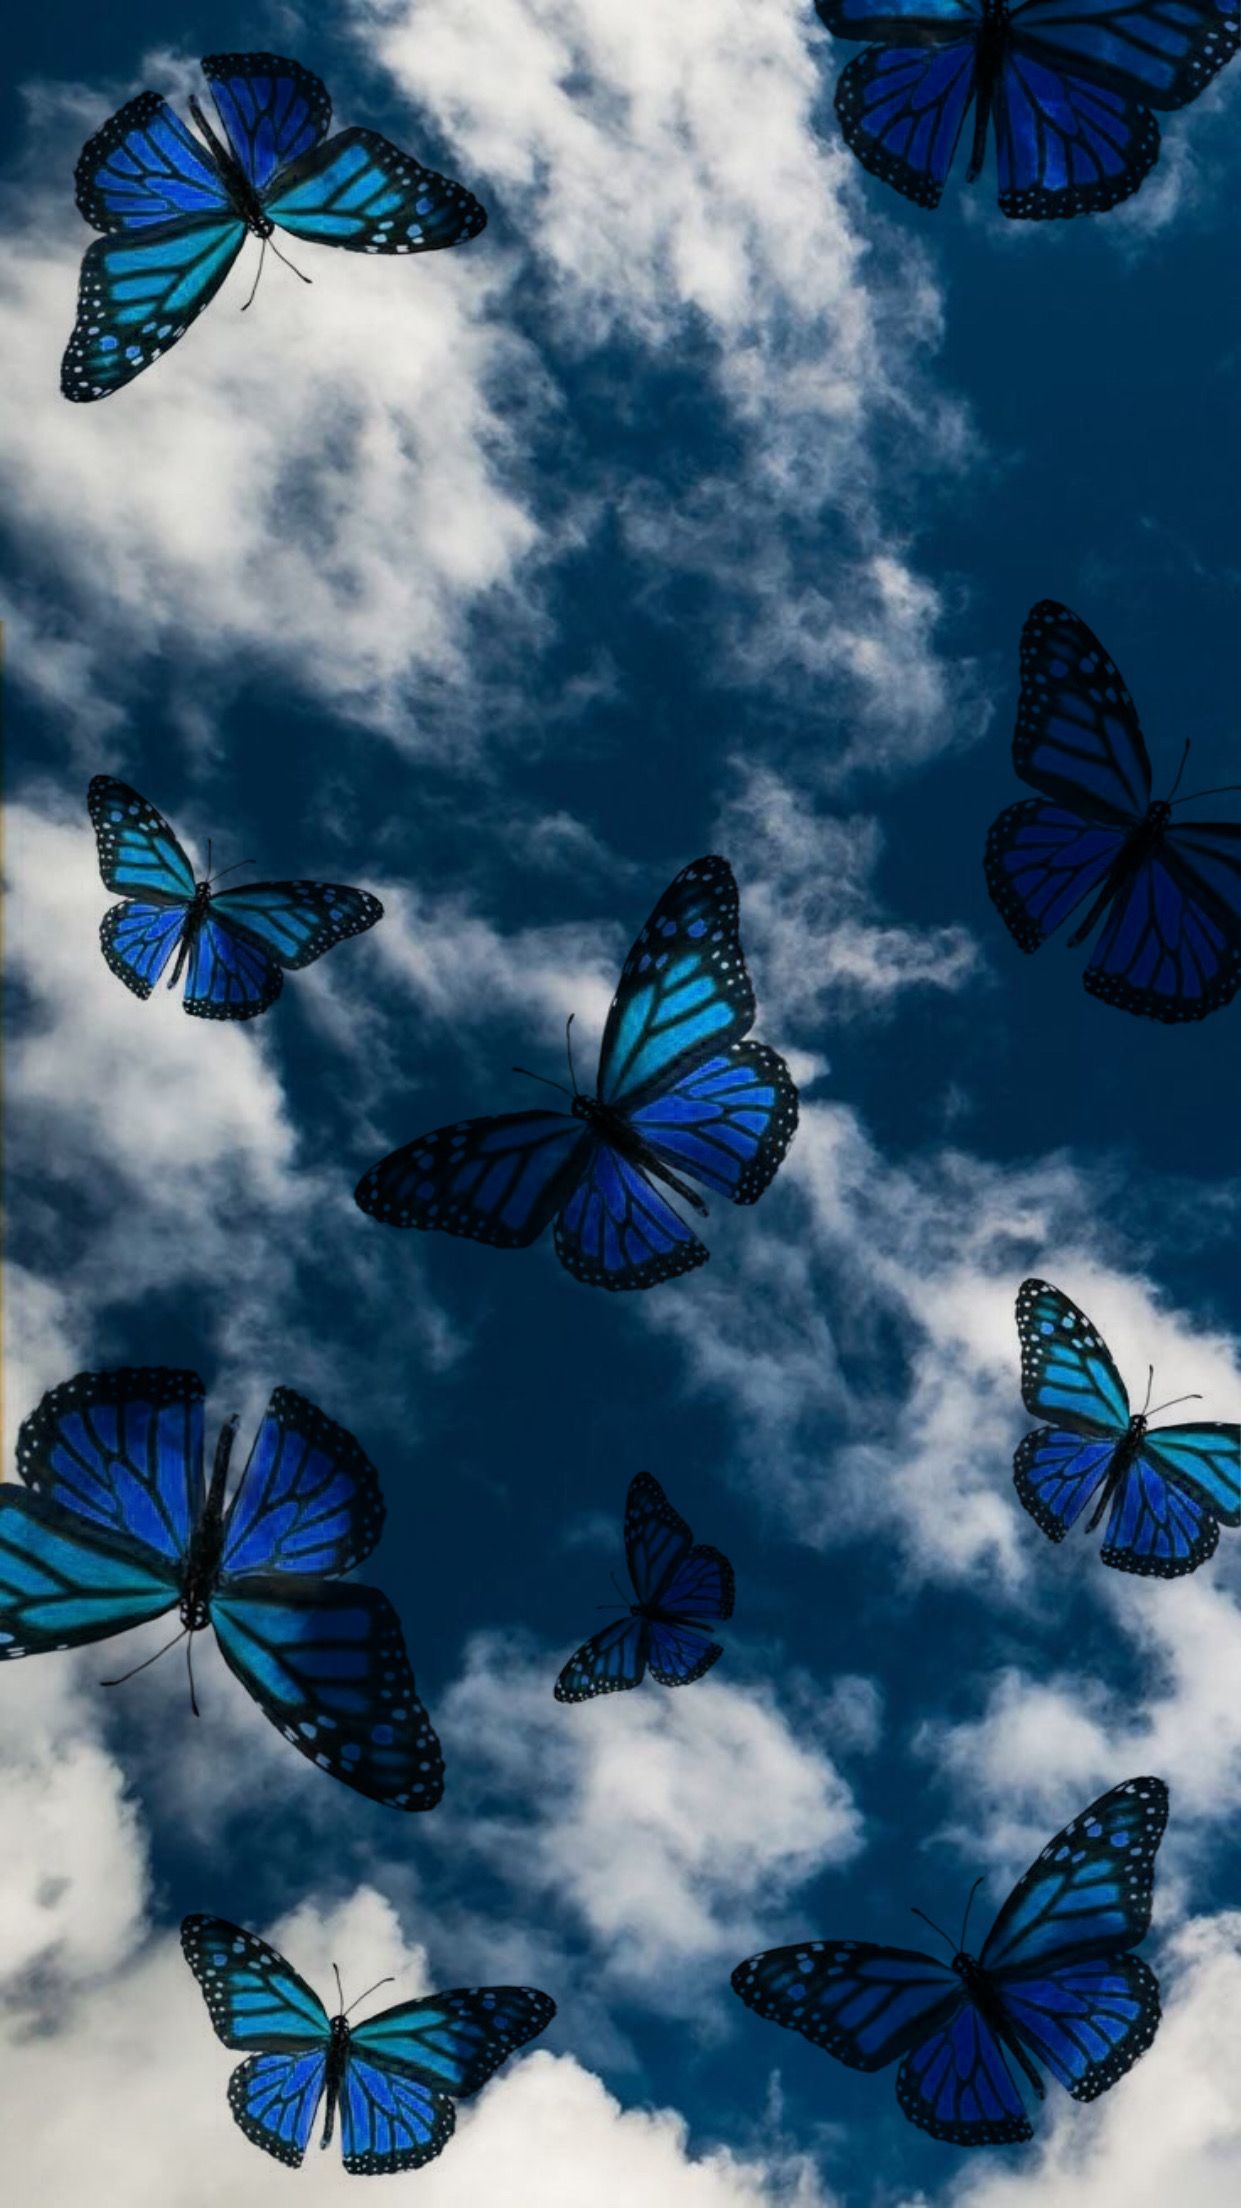 Turquoise Butterfly Wallpapers